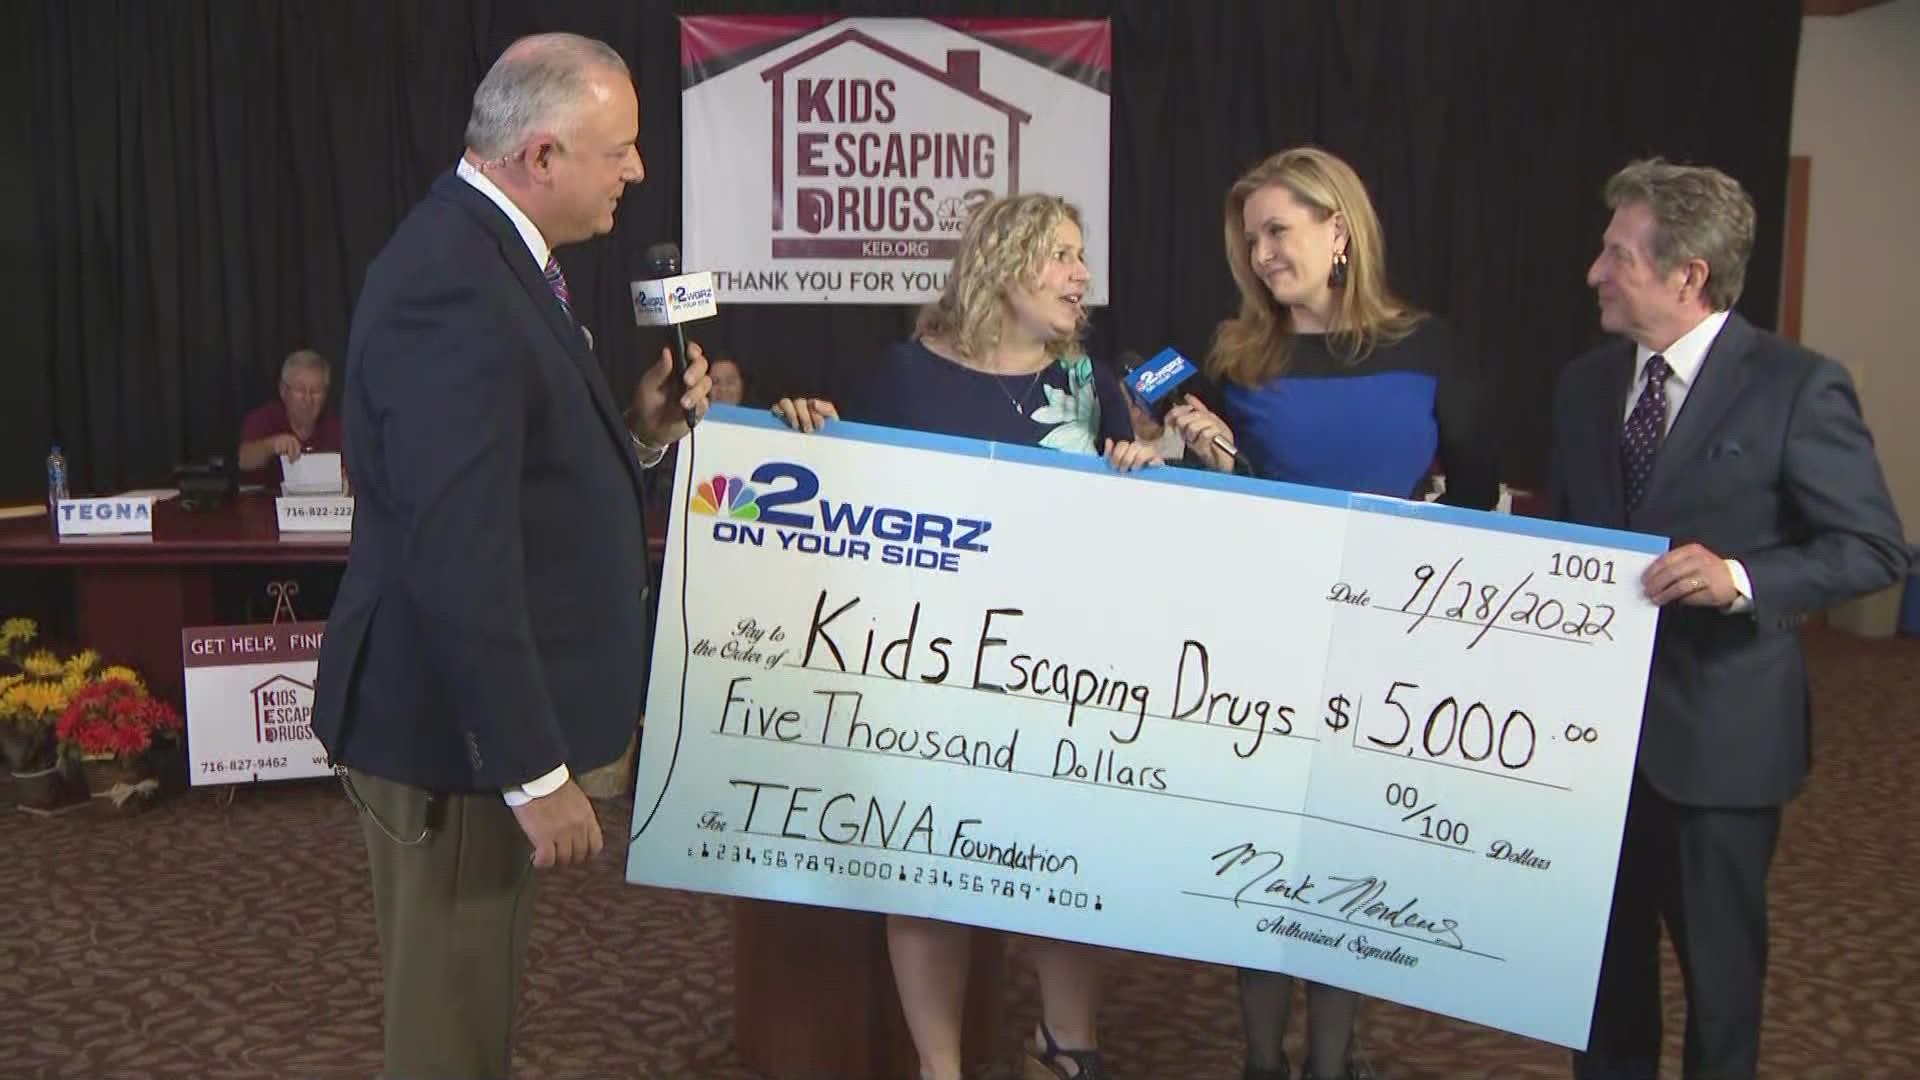 WGRZ General Manager Mark Manders presents Kids Escaping Drugs with a $5,000 check.